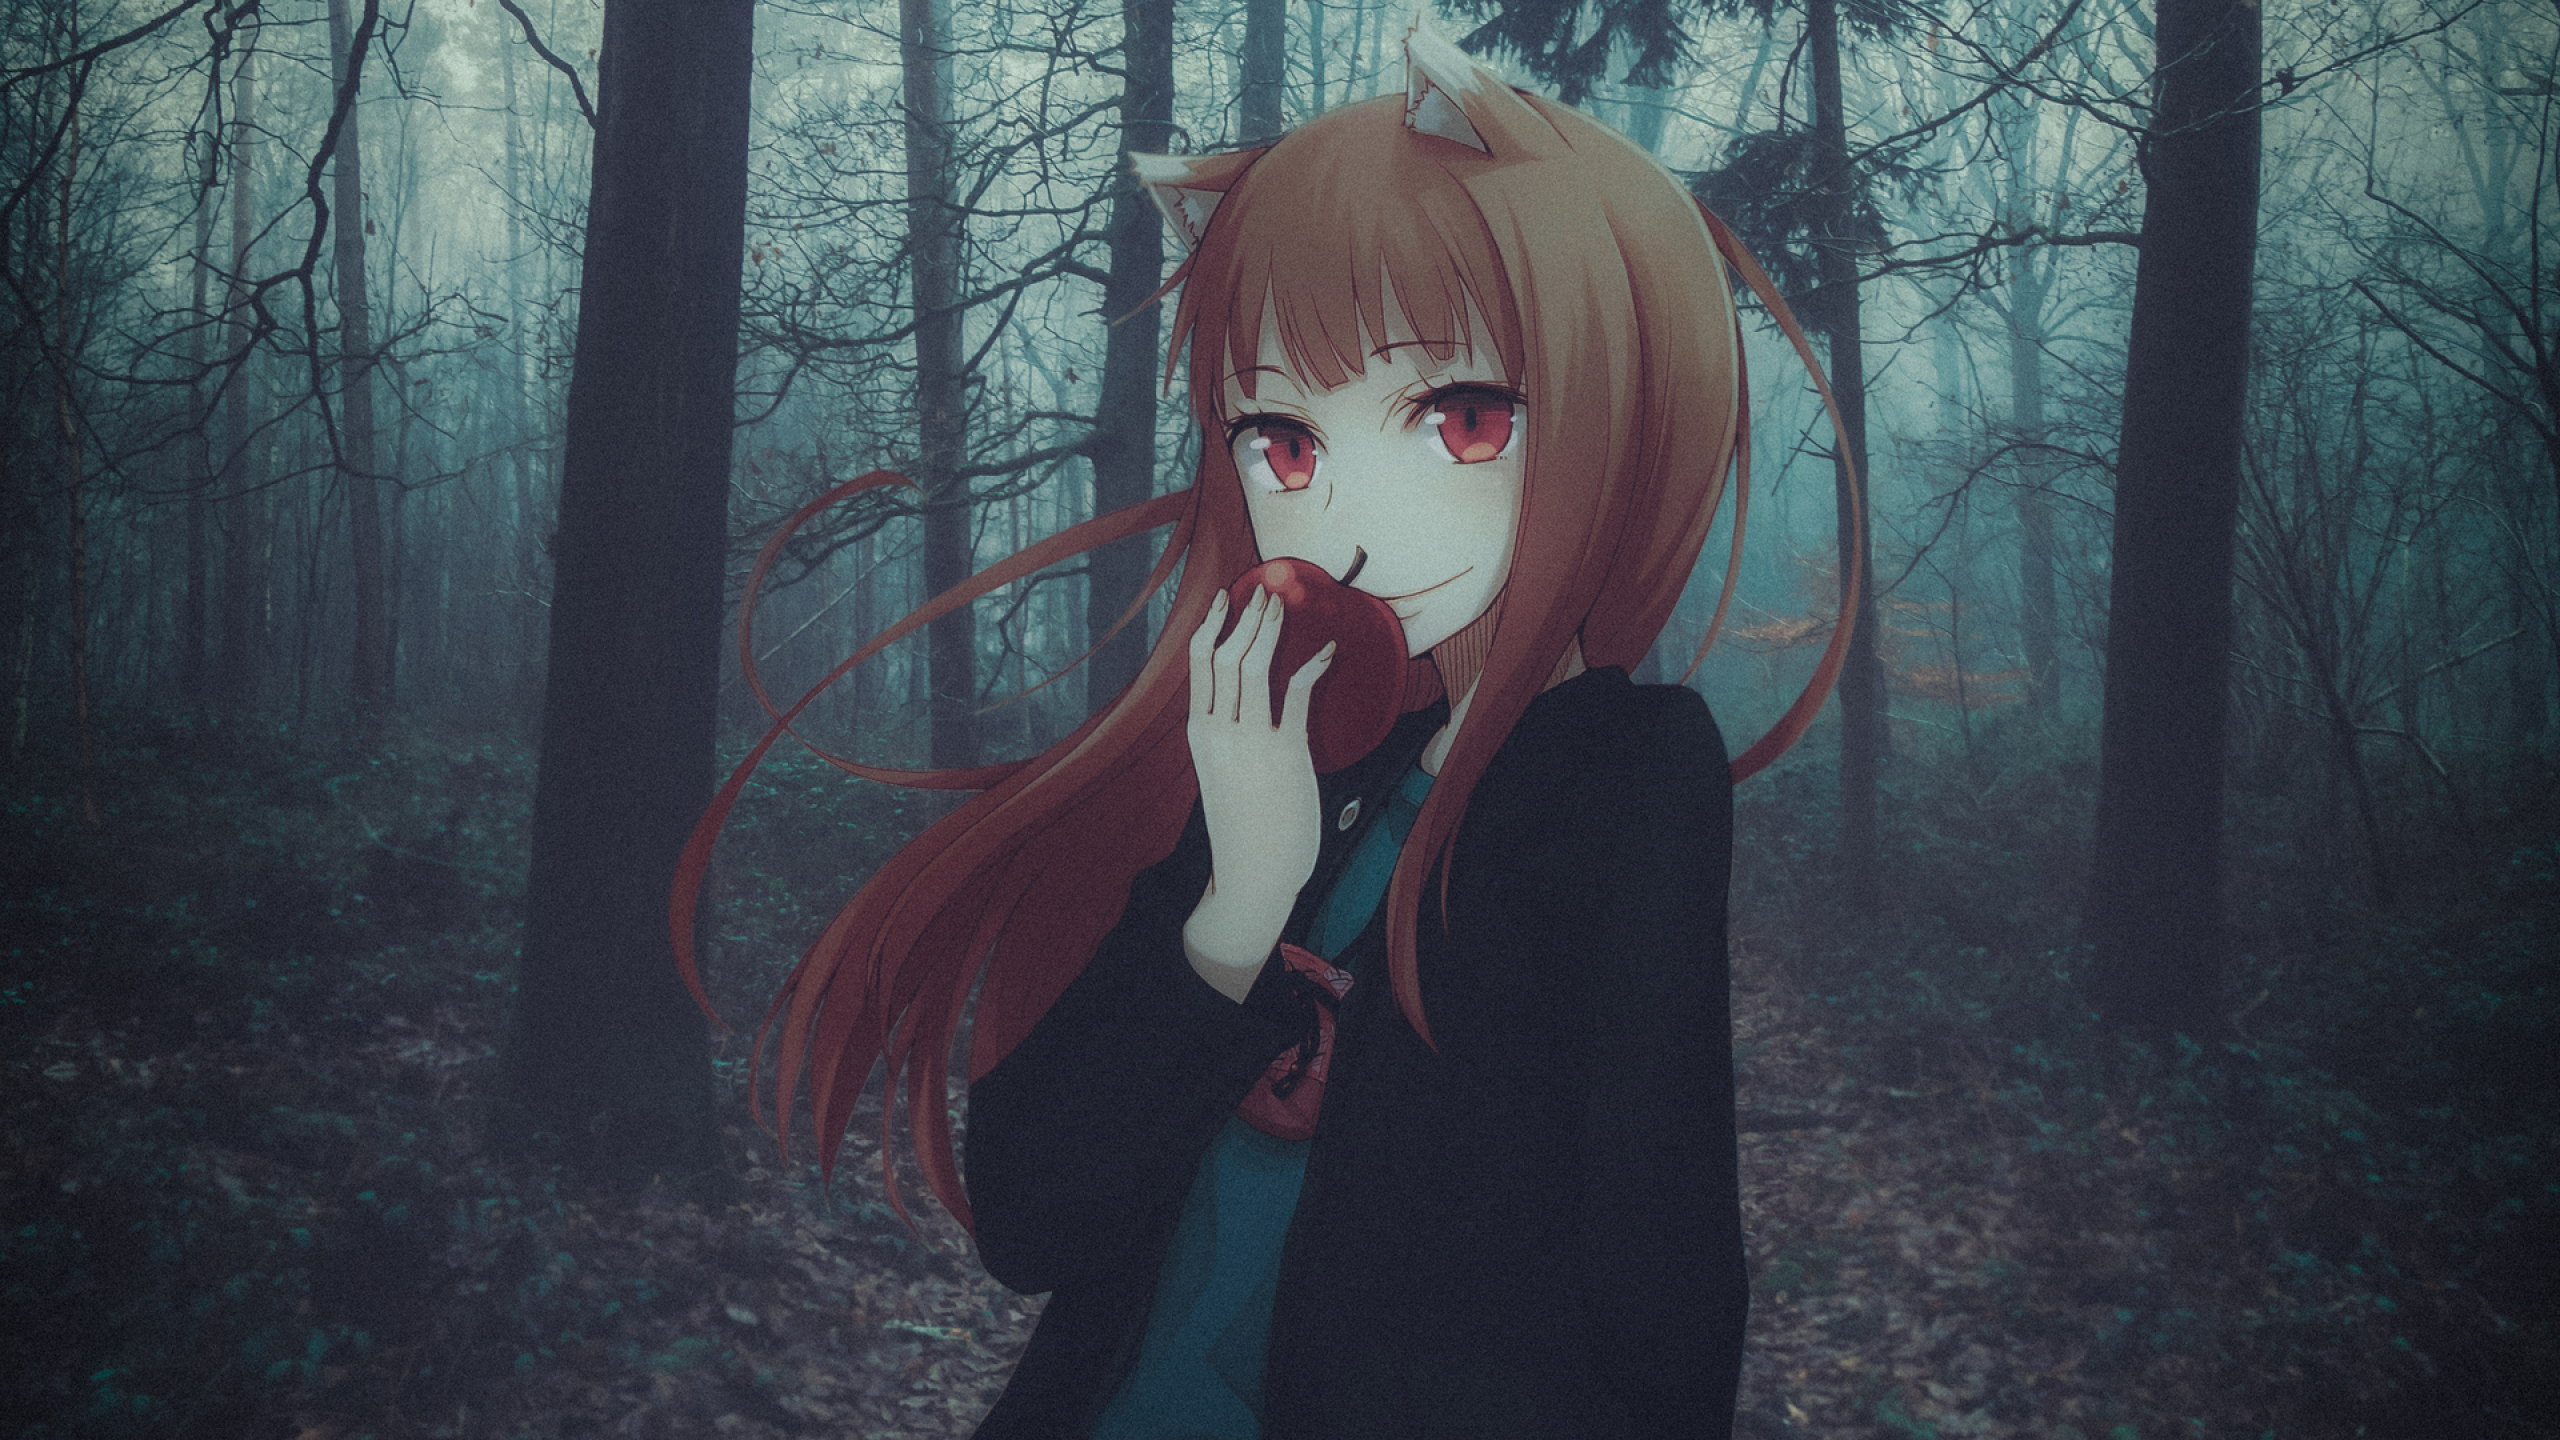 2560x1440 Holo Spice And Wolf 1440p Resolution Wallpaper Hd Anime Images, Photos, Reviews